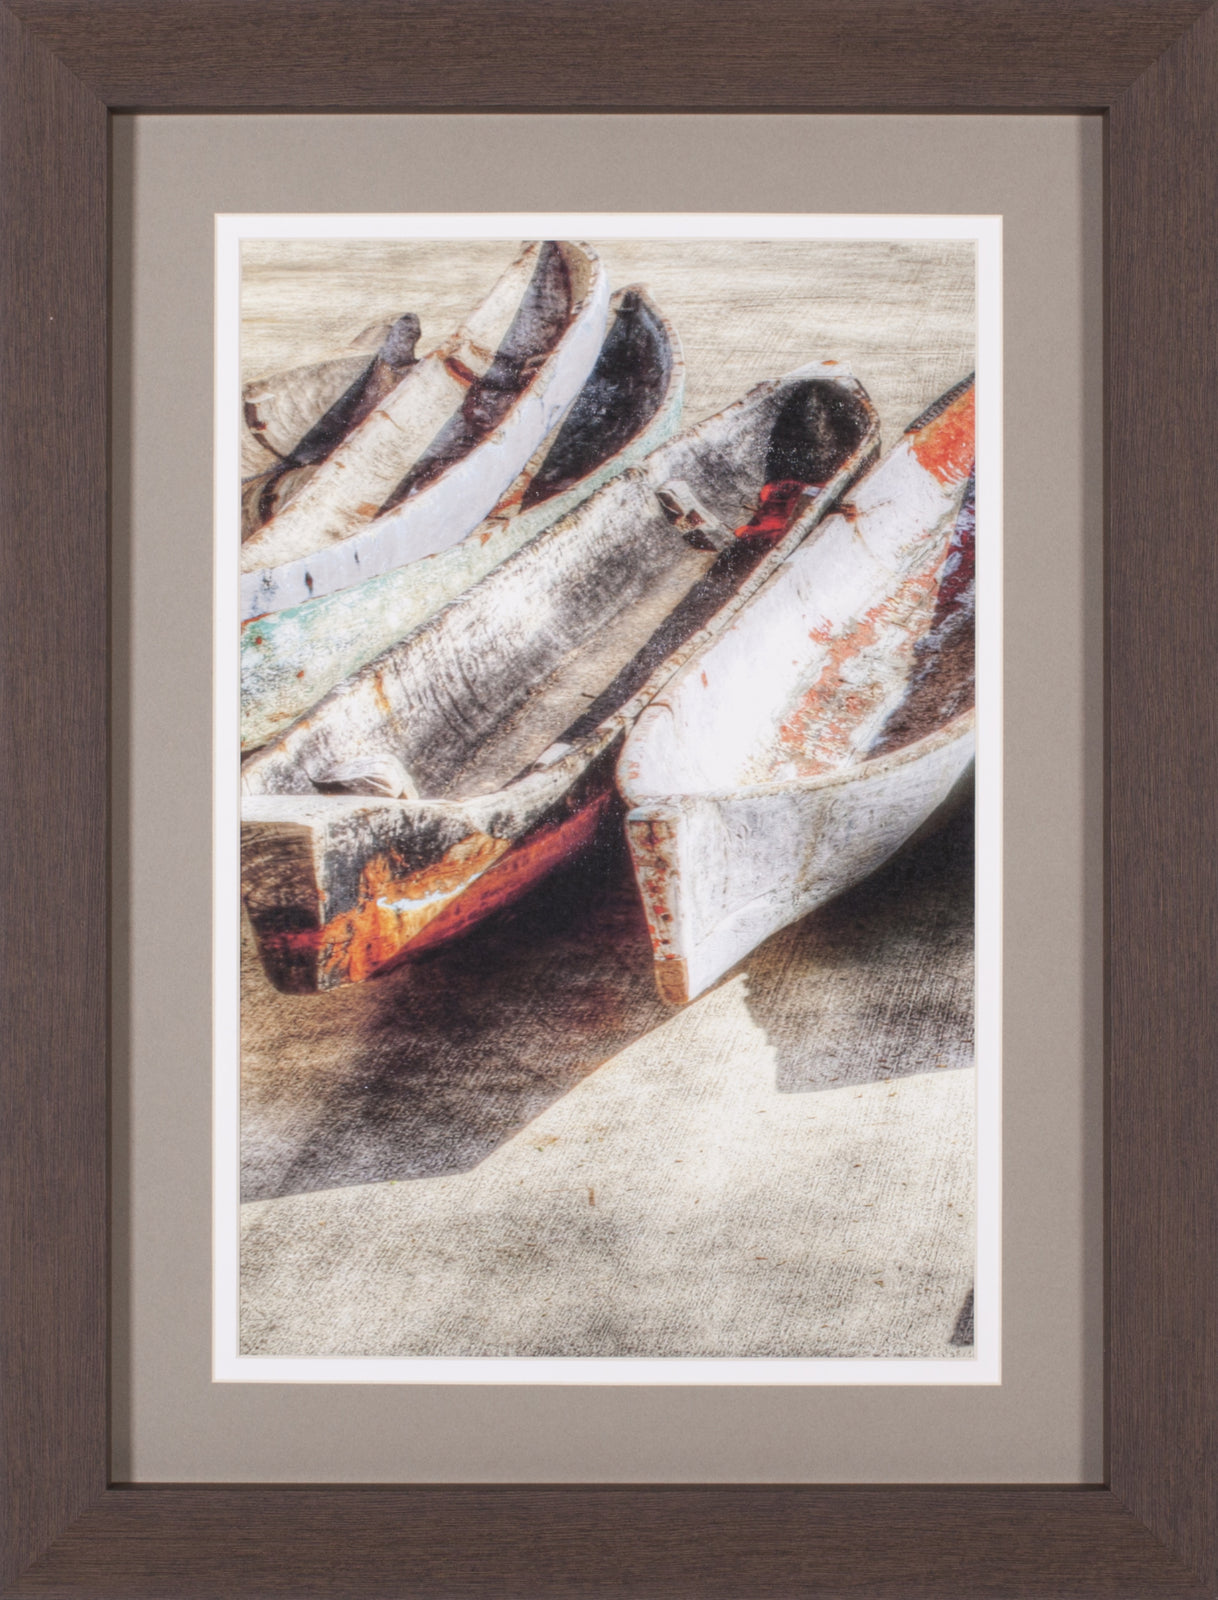 Art Effects Canoes I Wall Art by Celebrate Life Gallery